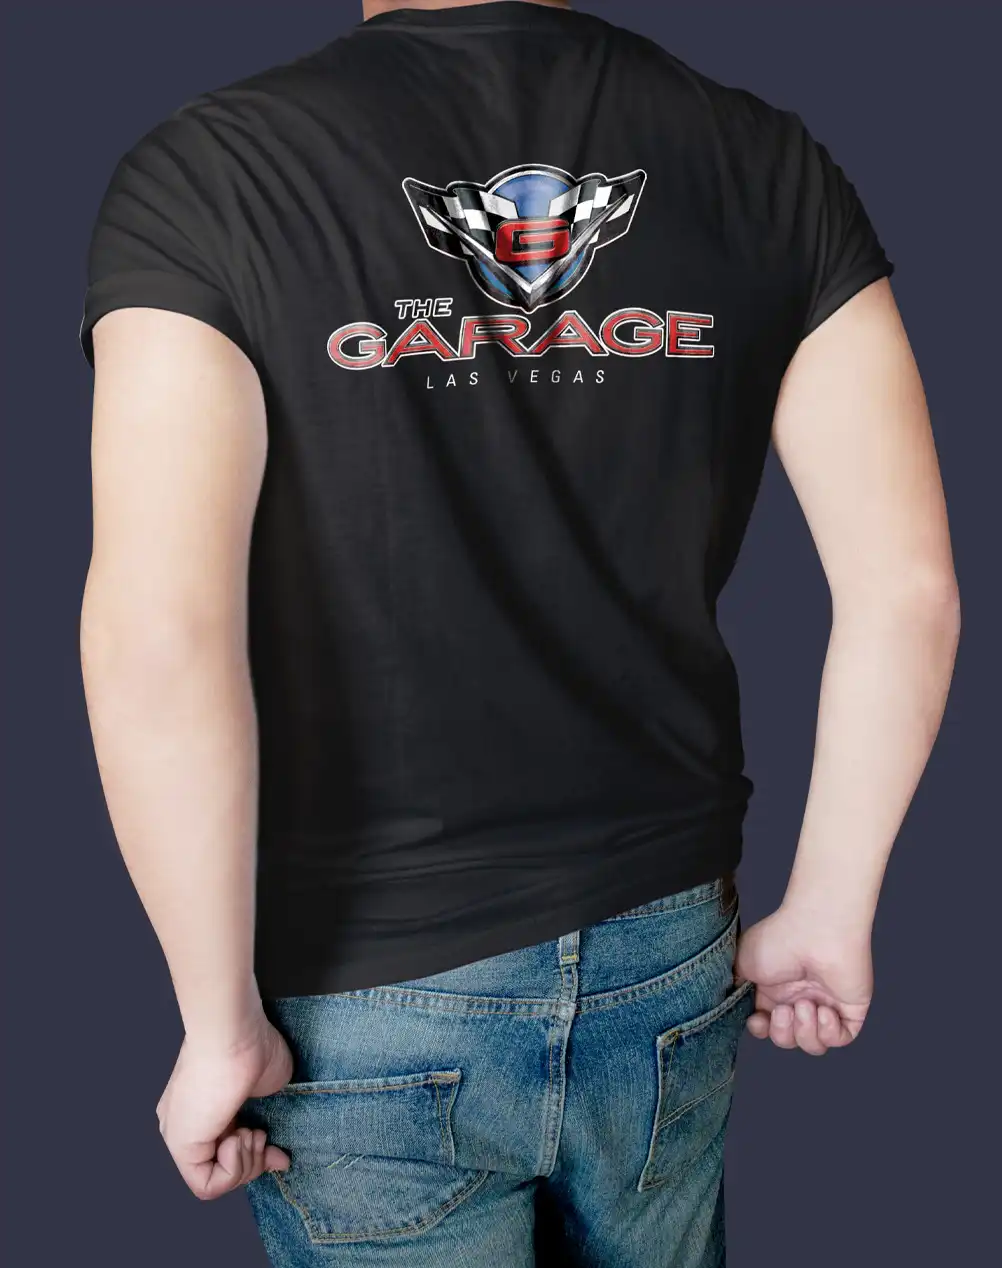 Handsome guy modeling the back of a T-shirt with The Garage Las Vegas logo